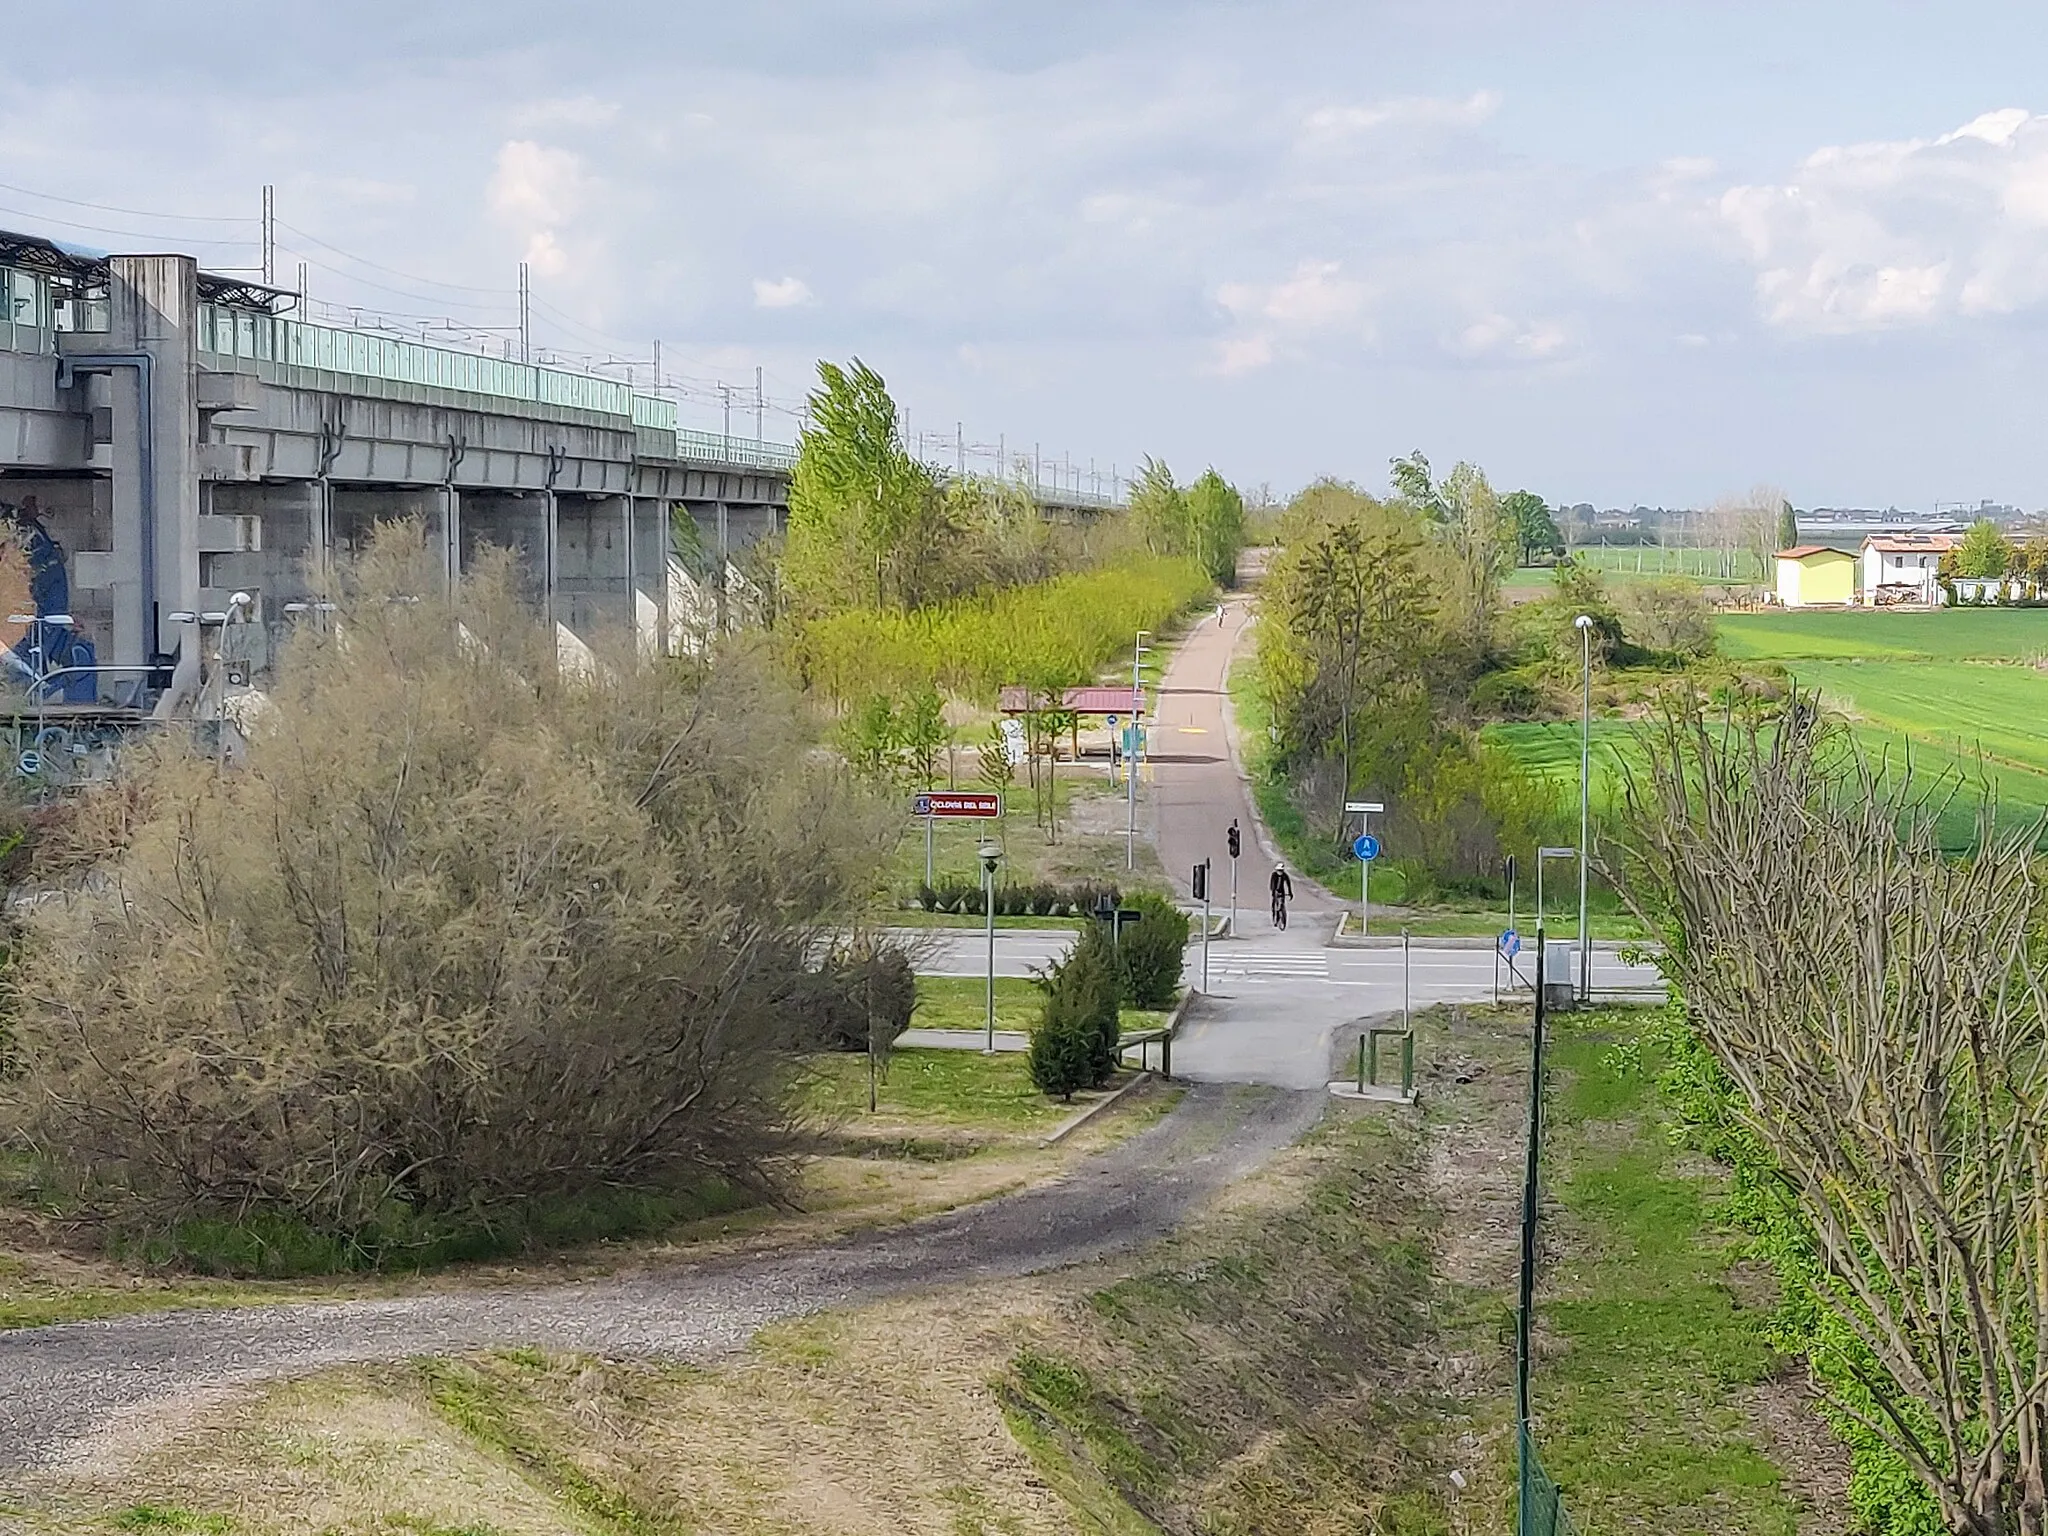 Photo showing: A stretch of EuroVelo 7 cycleway next to Camposanto railway station, in Emilia-Romagna, Italy. This stretch opened on 13 April 2021.